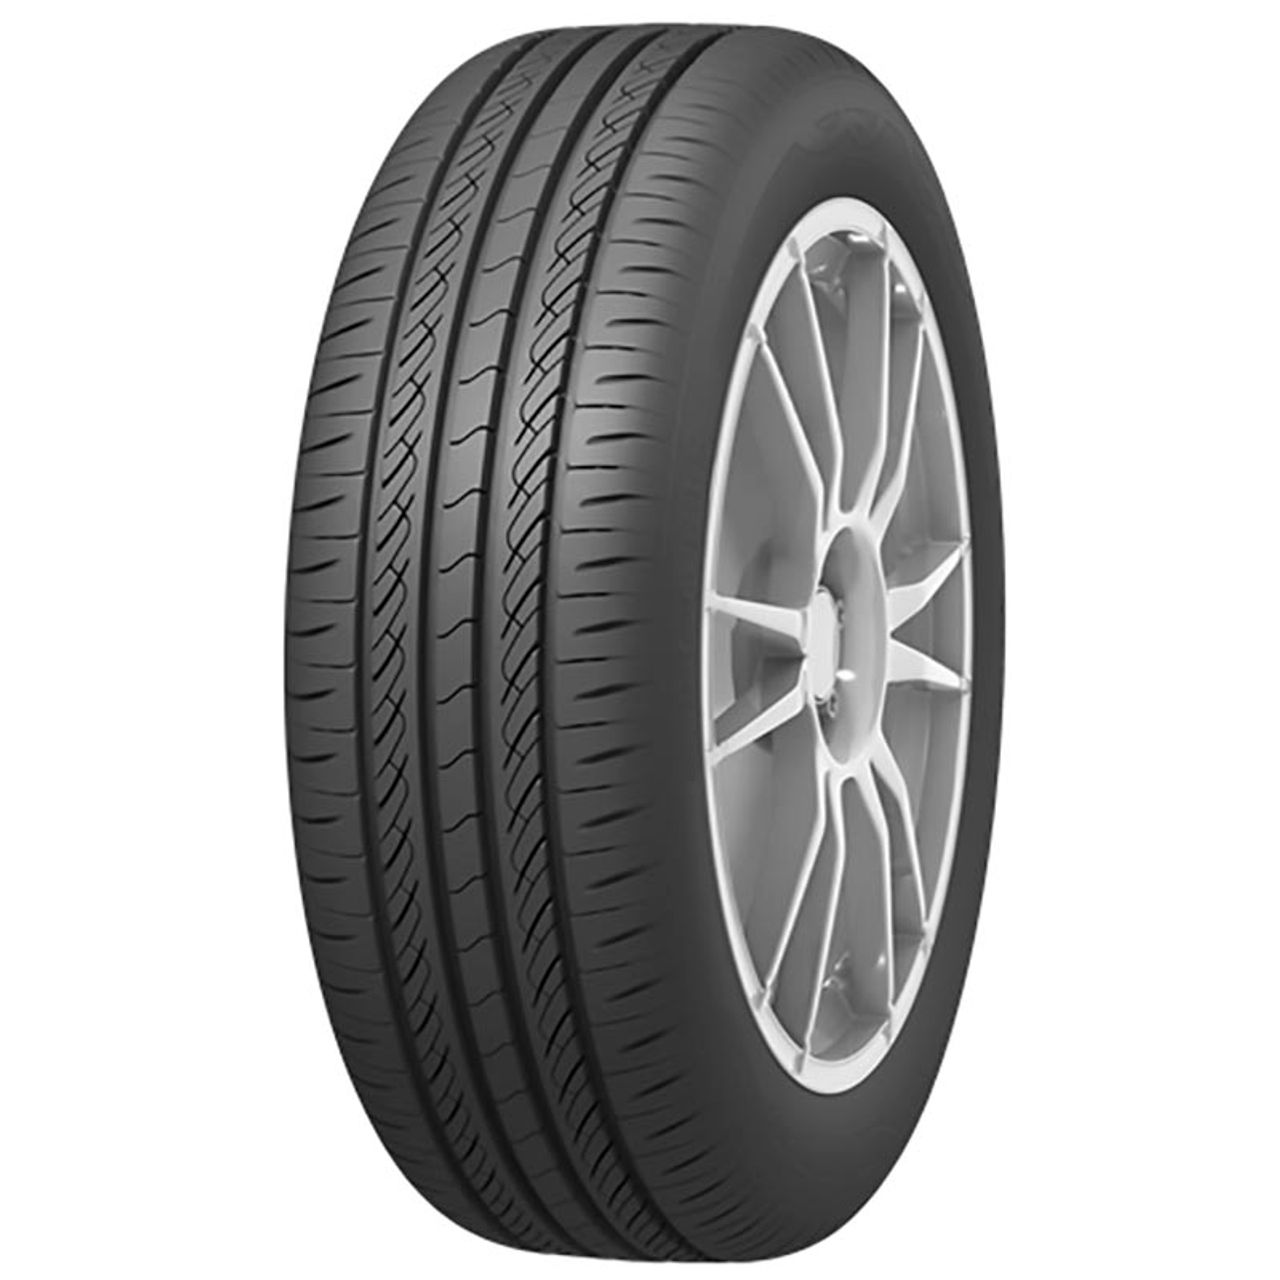 INFINITY ECOSIS 185/60R15 88H BSW